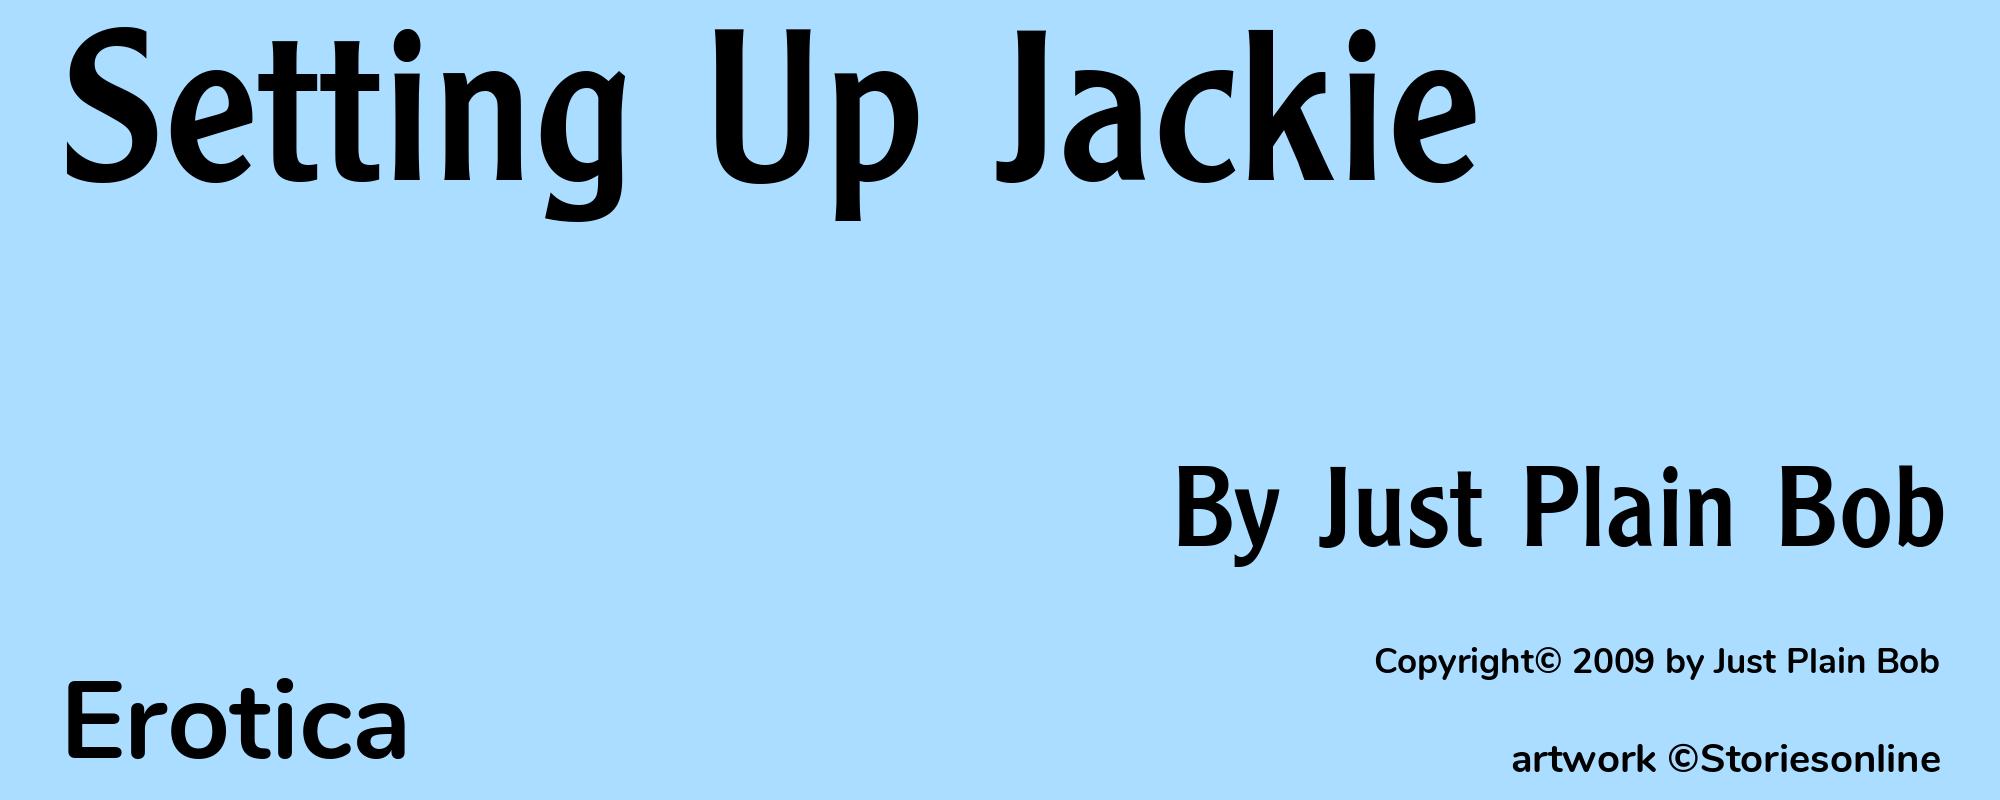 Setting Up Jackie - Cover